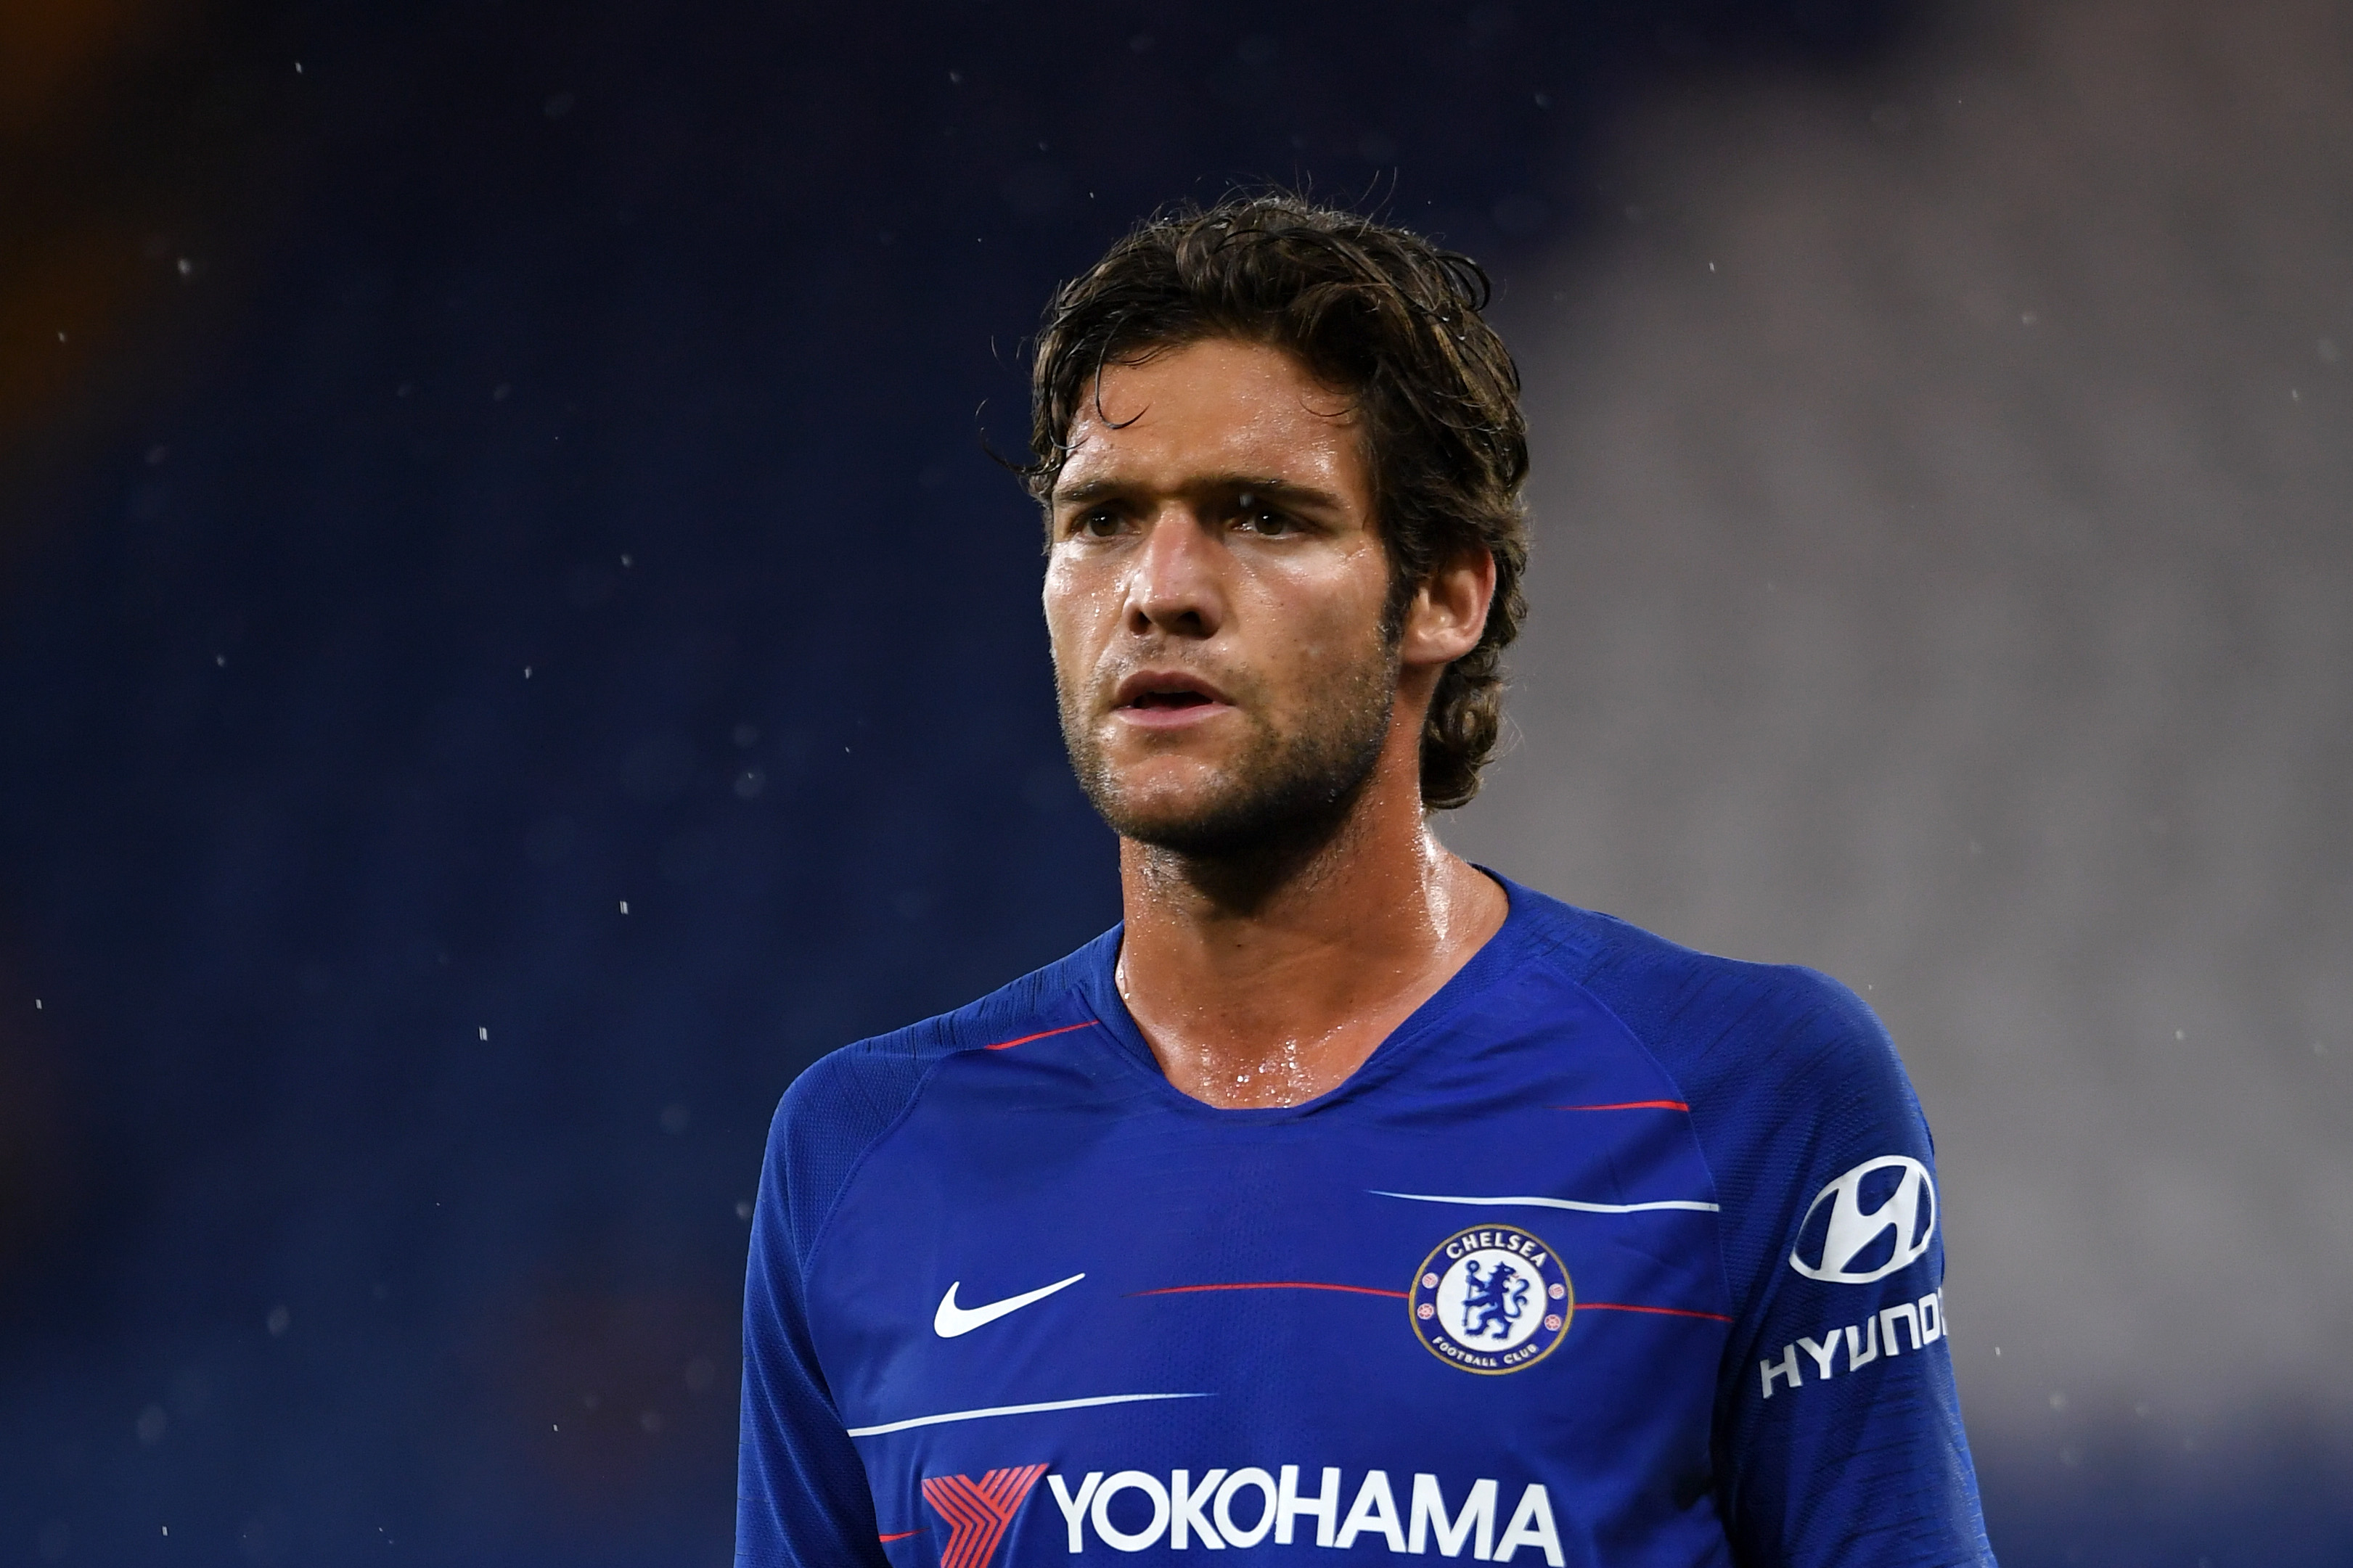 LONDON, ENGLAND - AUGUST 07:  Marcos Alonso of Chelsea looks on during the pre-season friendly match between Chelsea and Lyon at Stamford Bridge on August 7, 2018 in London, England.  (Photo by Mike Hewitt/Getty Images)